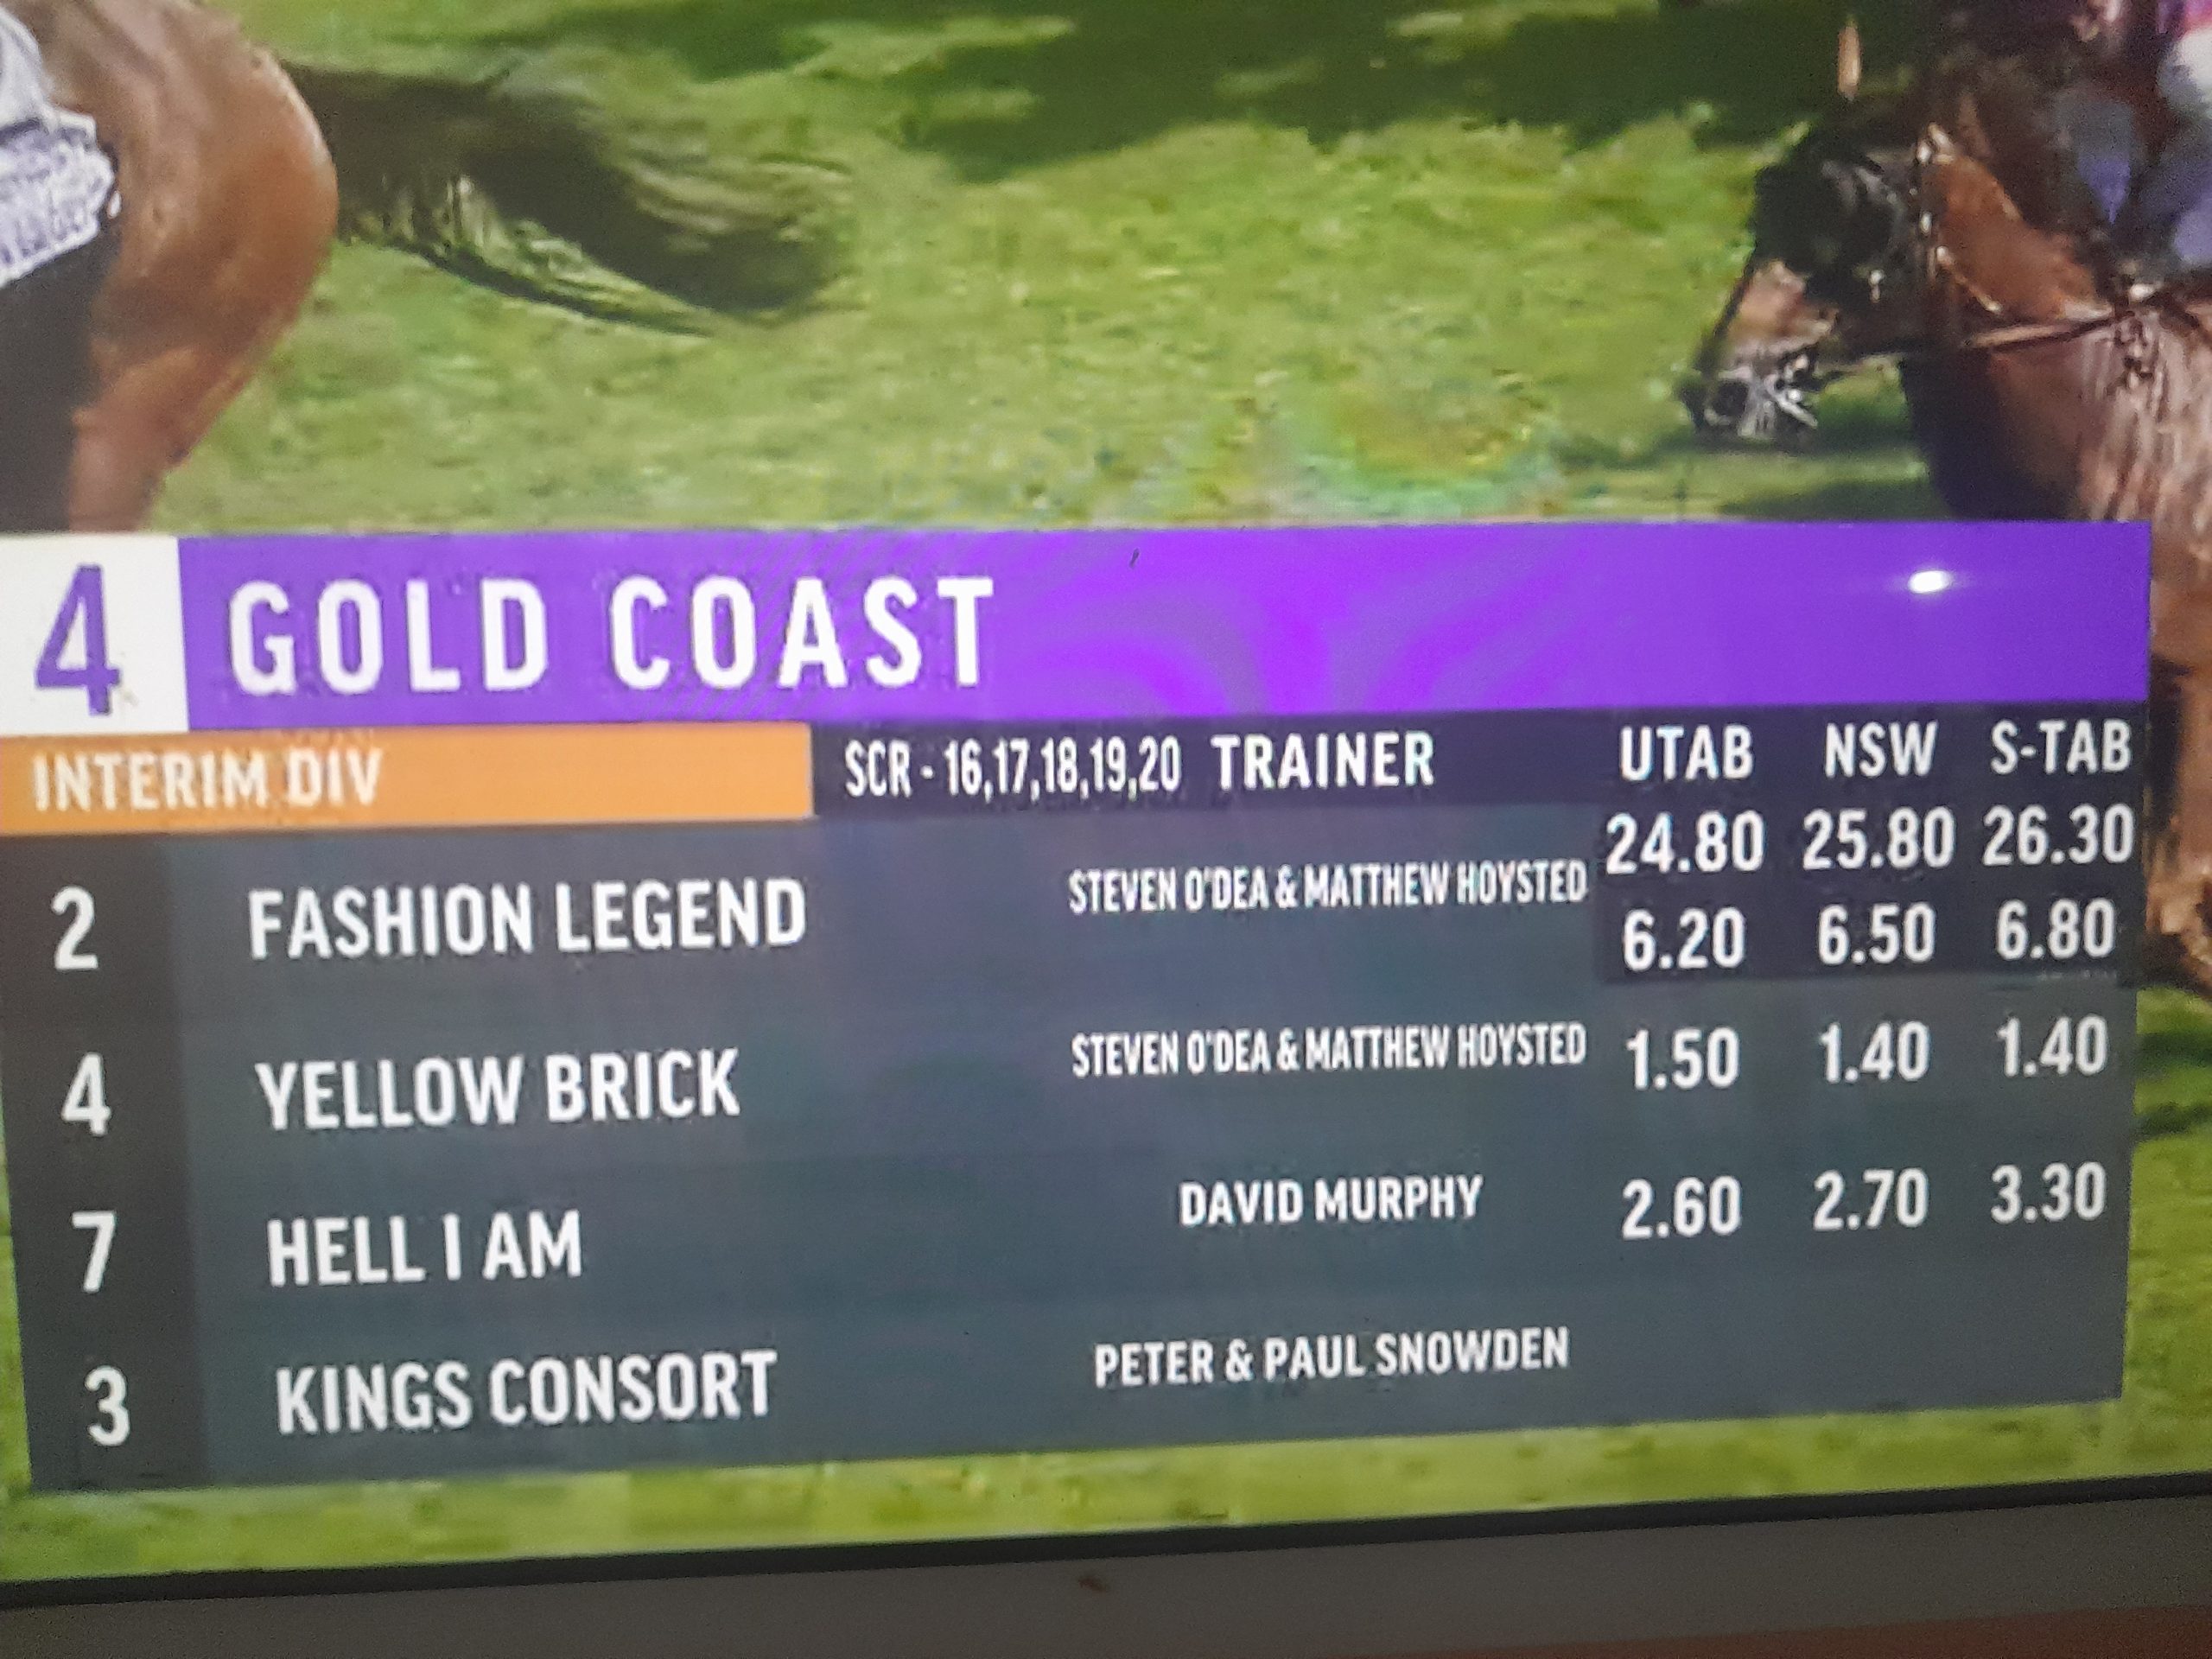 We Didn’t Have to Wait Long to Nail the Quaddie! – And We Got the 5th Leg of the Pick Six – Just One More to Go!